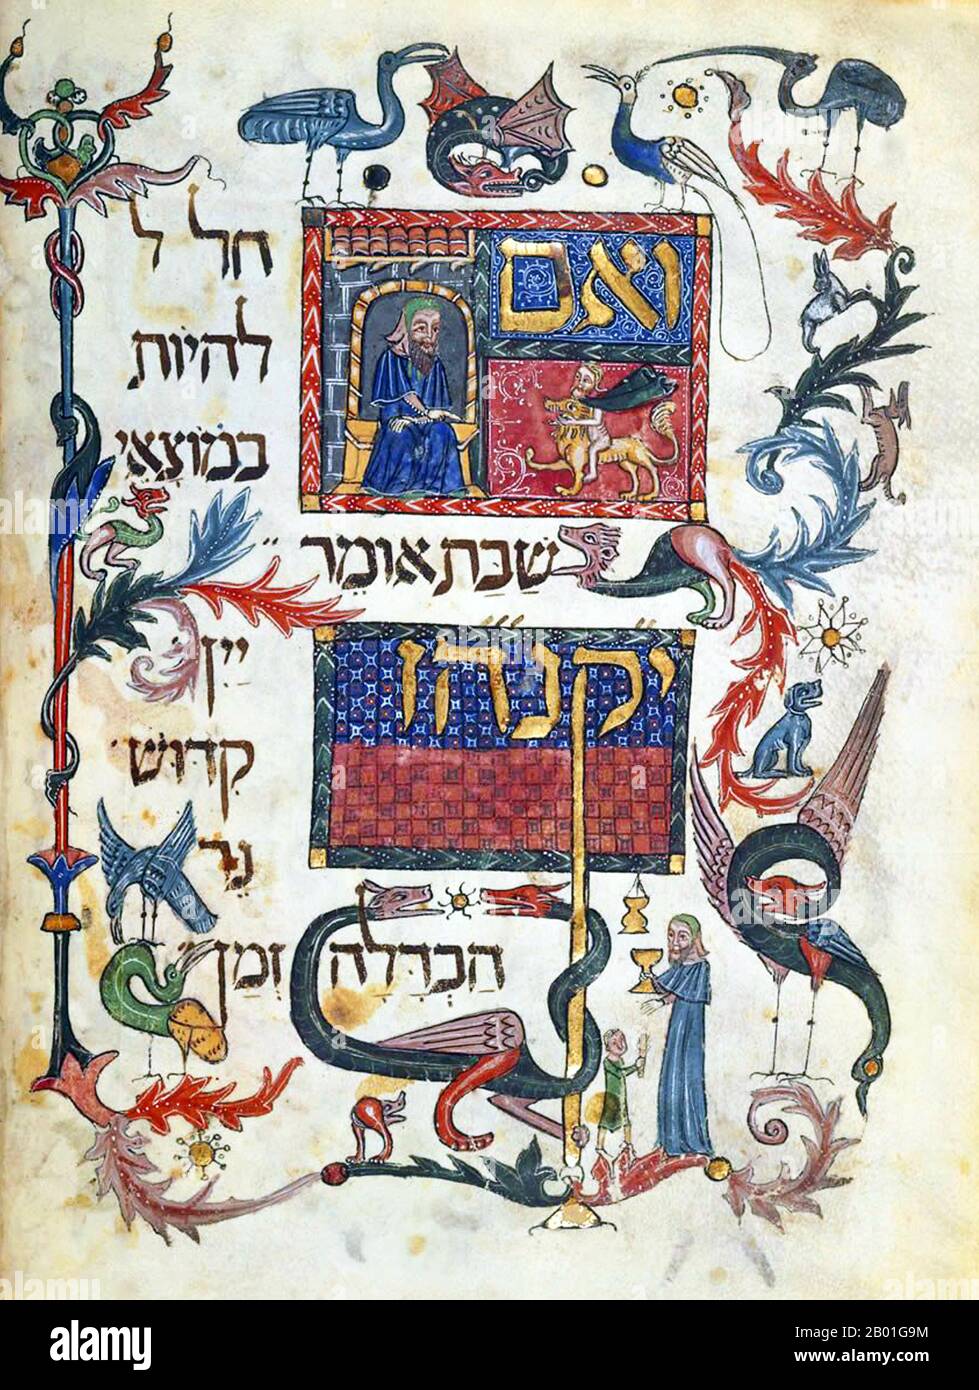 Spain: Illuminated page from the Barcelona Haggadah, Catalonia, 14th century.  Profusely illustrated with people, flowers, birds and imaginary creatures, this prayer book for the Jewish Festival of Passover is one of the most richly pictorial of all Jewish texts. Meant to accompany the Passover eve service and festive meal, it was also a status symbol for its owner in 14th-century Spain.  Unlike other Spanish Haggadah manuscripts, the Barcelona Haggadah lacks the characteristic cycle of full-page Biblical narratives that normally prefaces the main text. Stock Photo